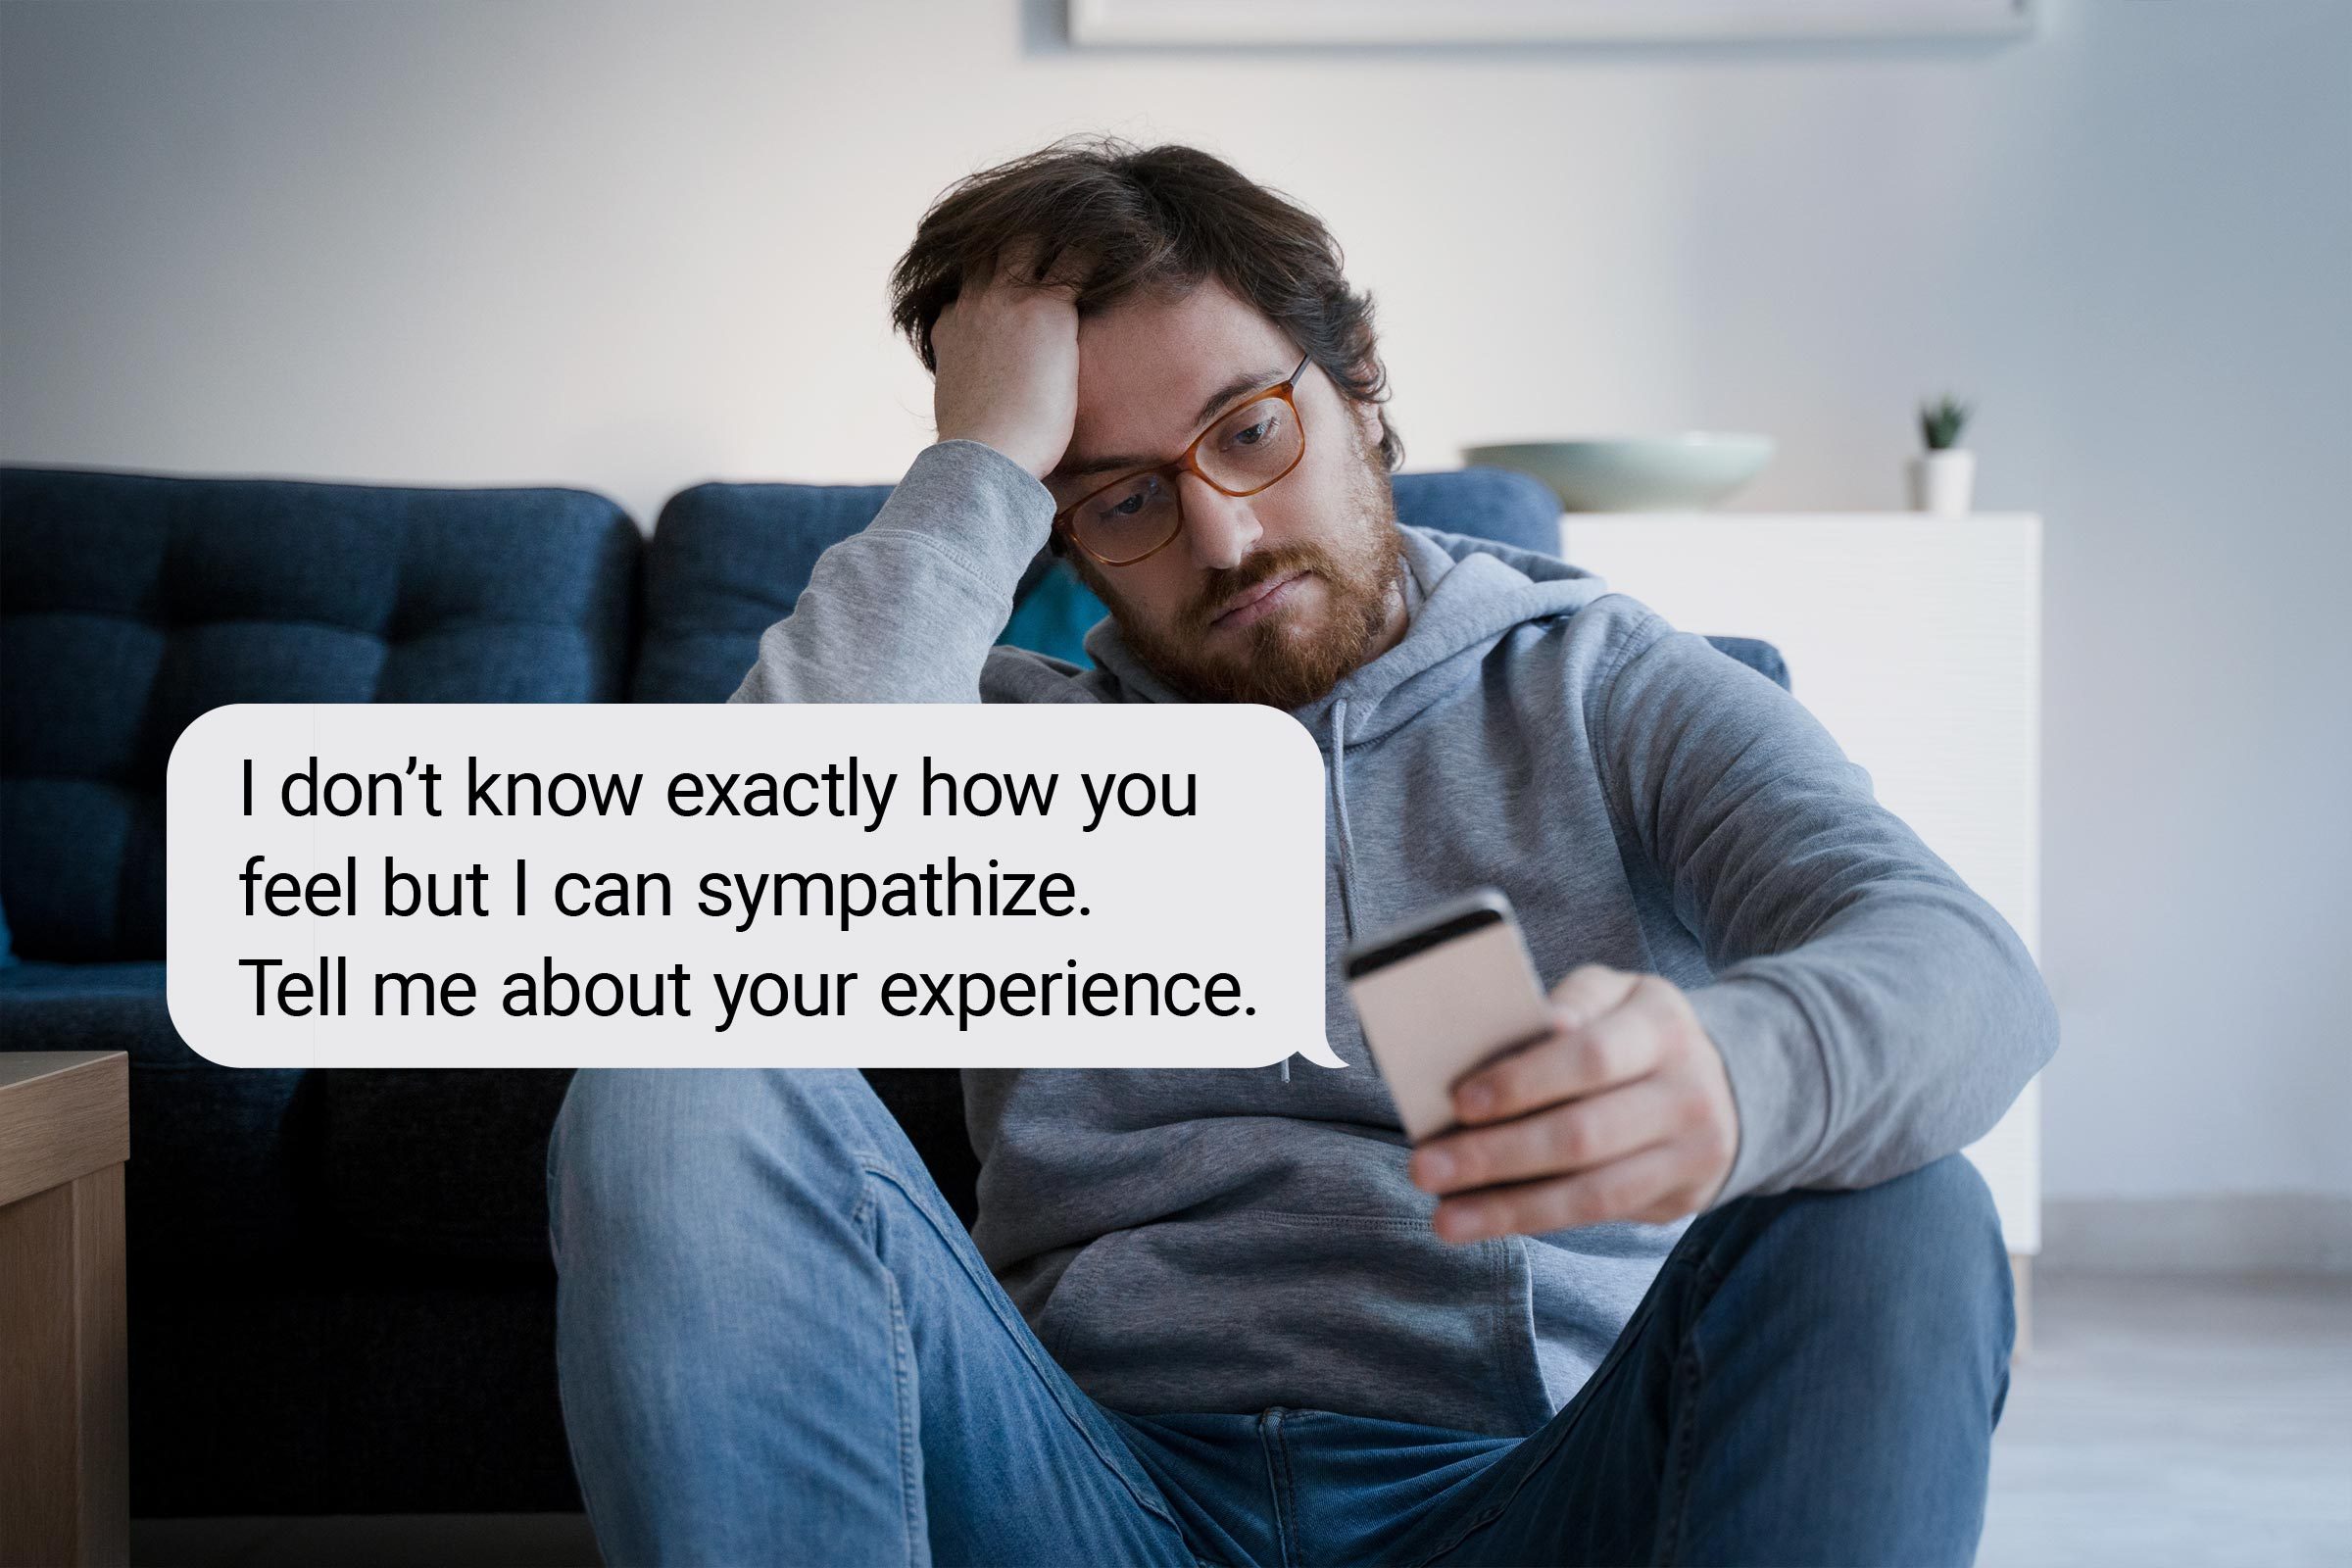 Speech bubble text: "I don't know exactly how you feel but I can sympathize. Tell me about your experience."